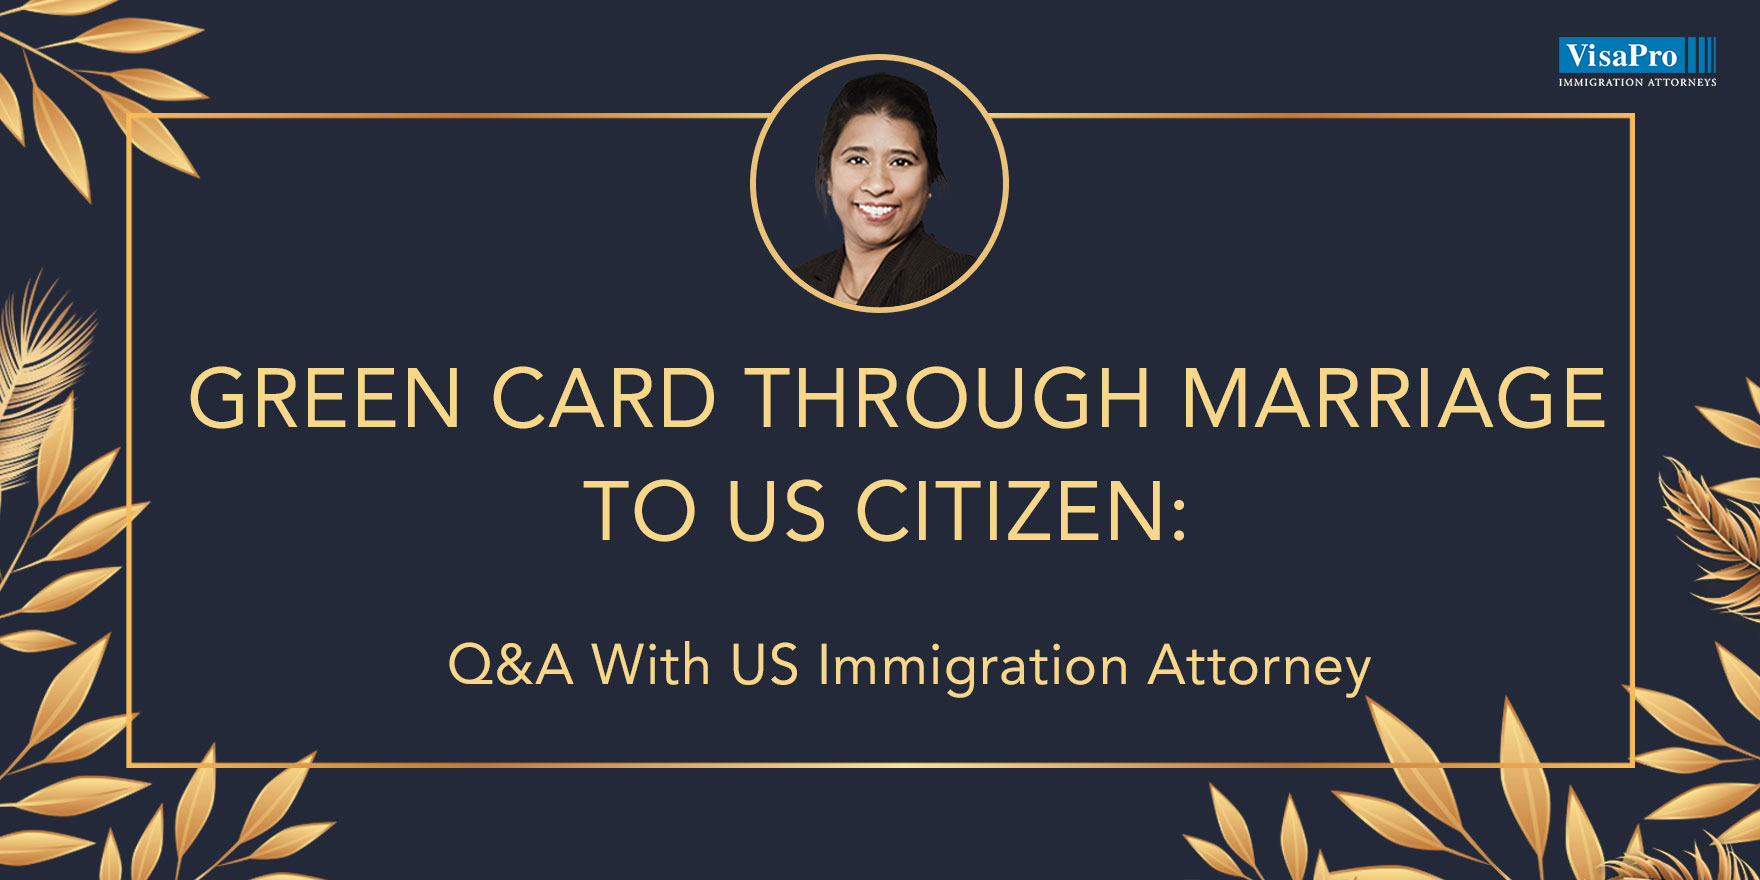 Green Card After Marrying US Citizen: Q&A With US Immigration Attorney, Islamabad, Pakistan